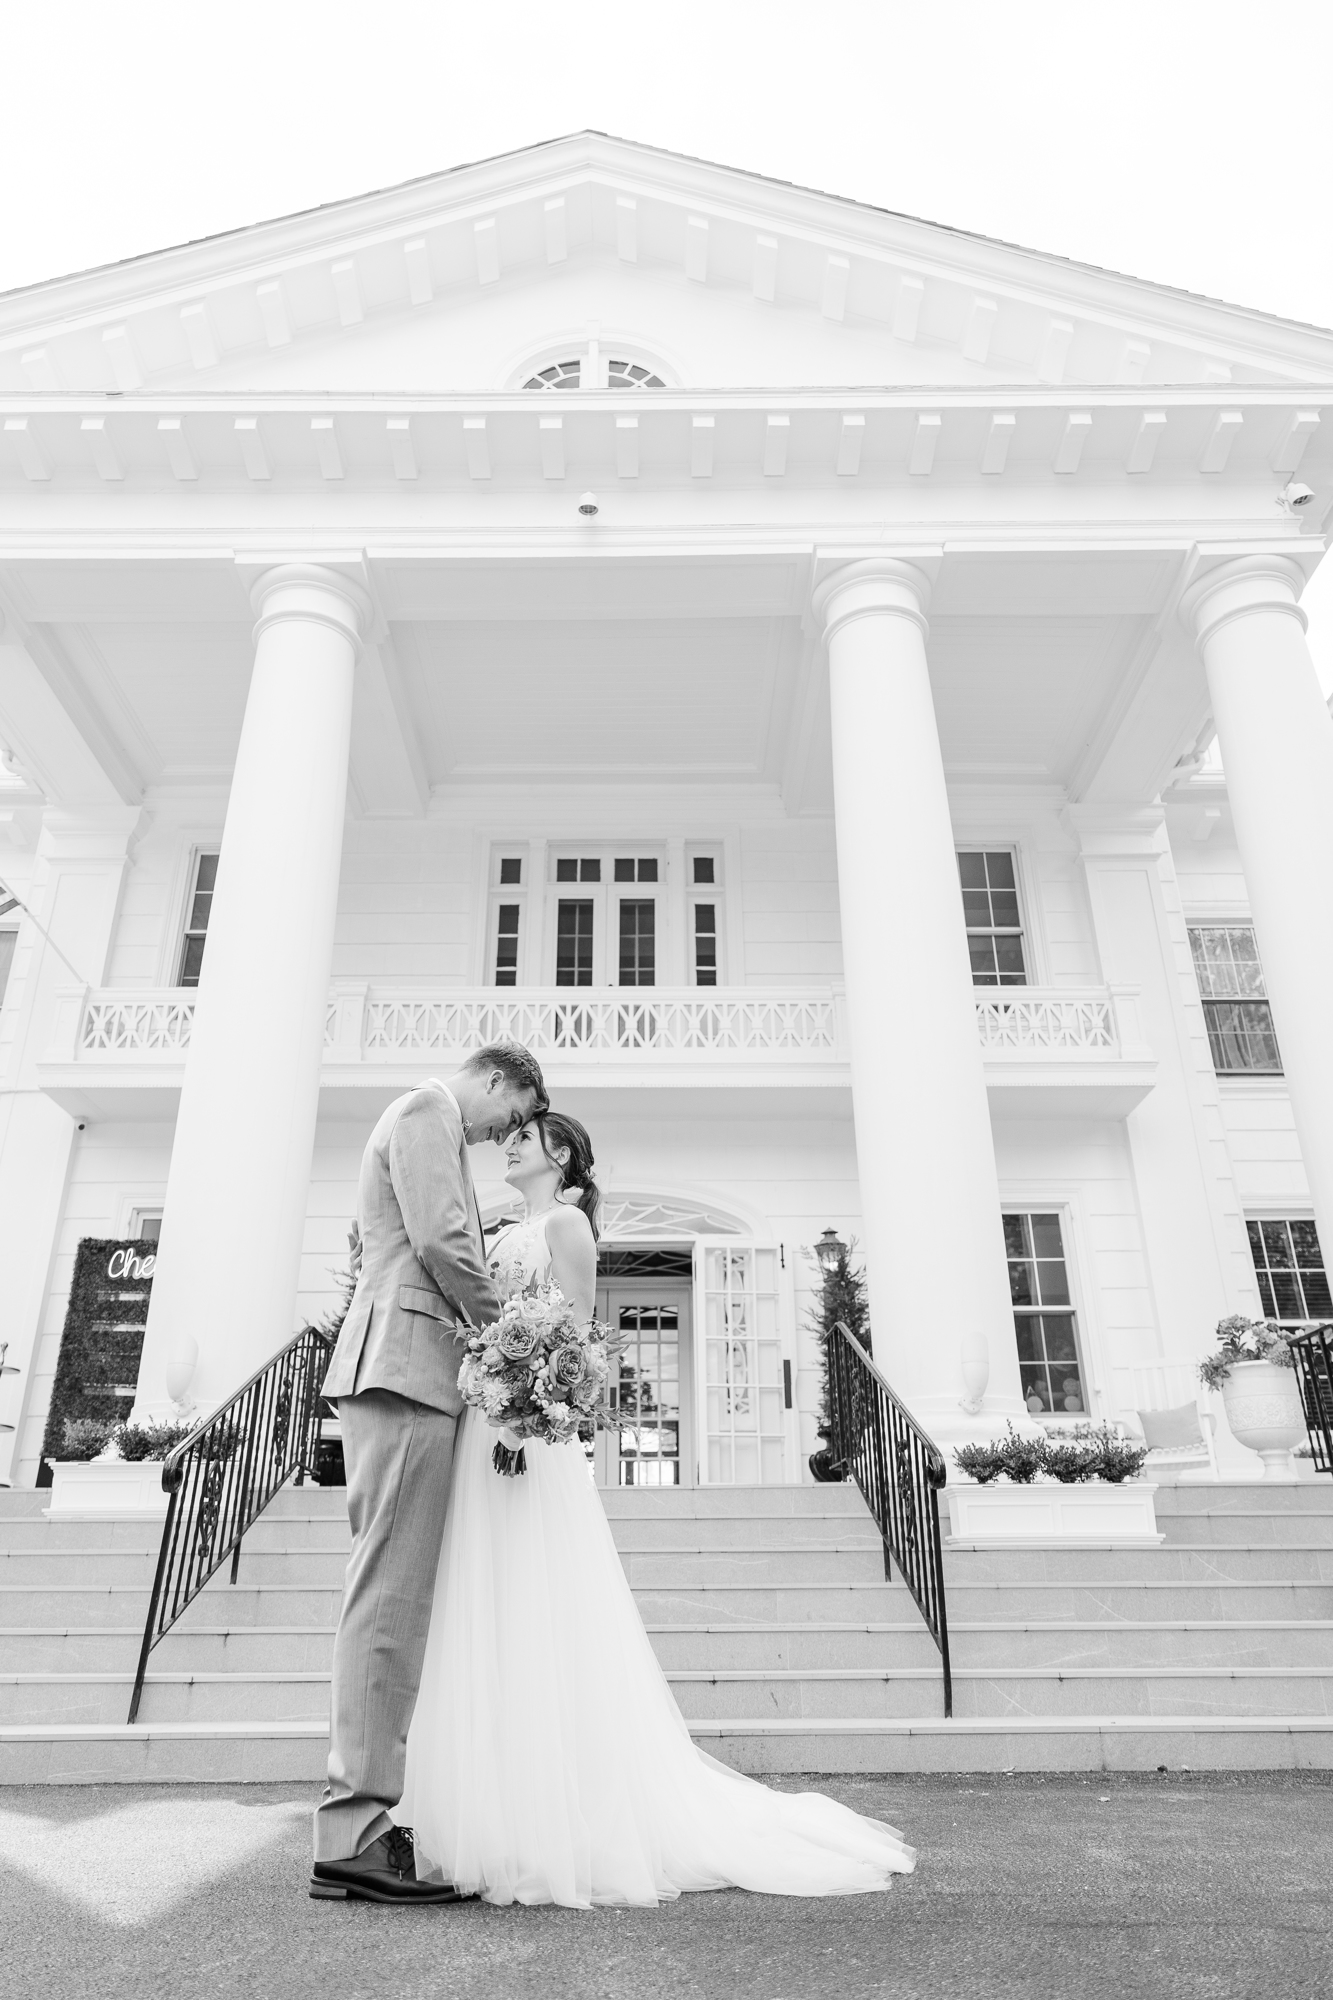 Magical Wedding at Briarcliff Manor in Westchester County